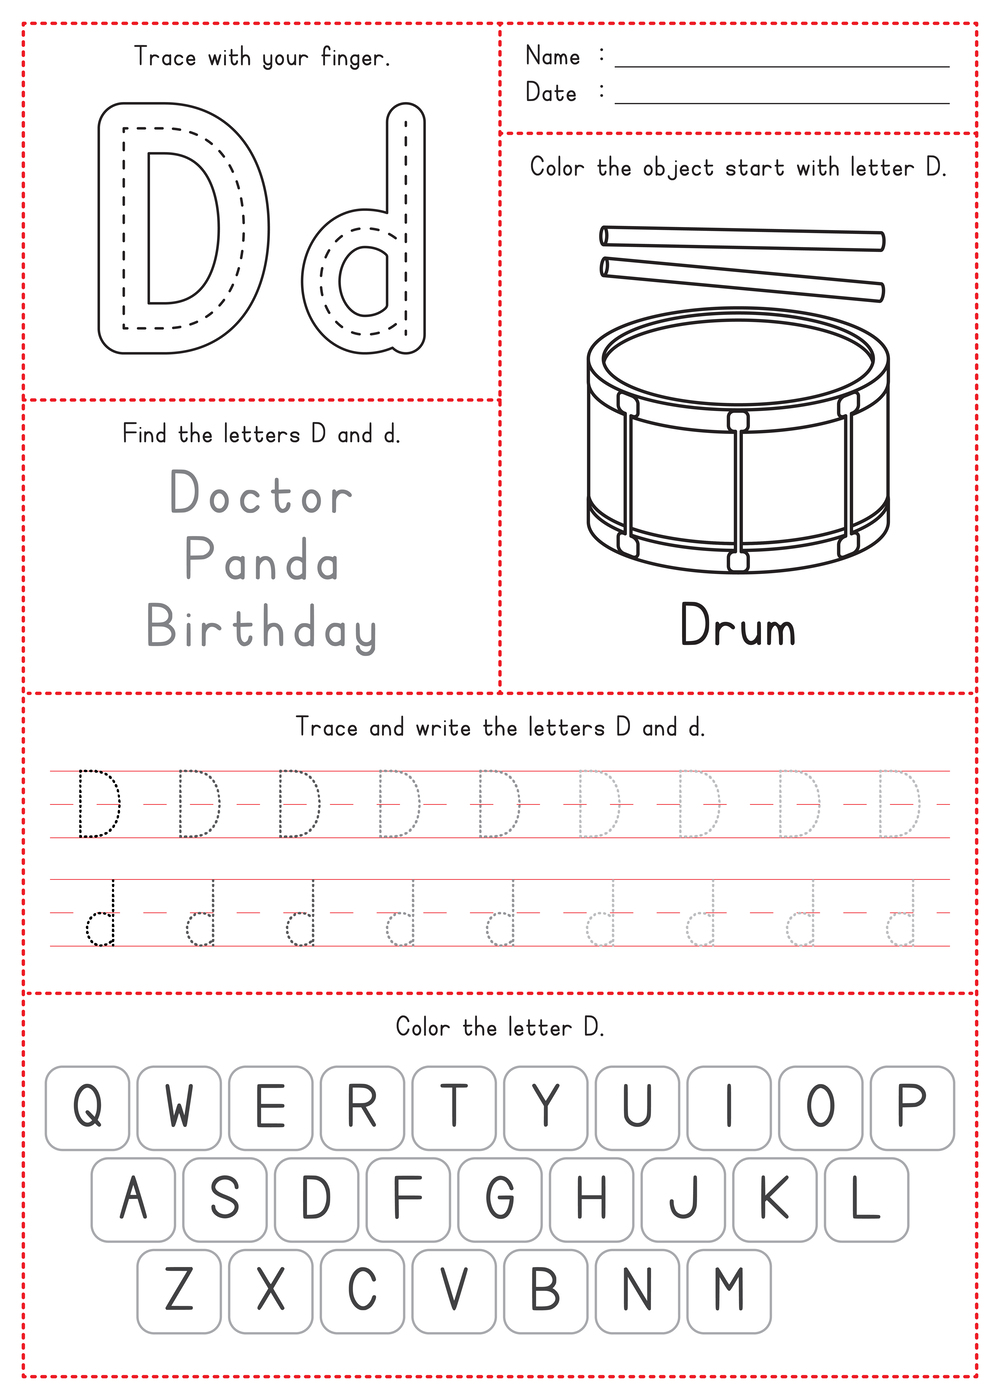 Letter tracing | Worksheet Zone